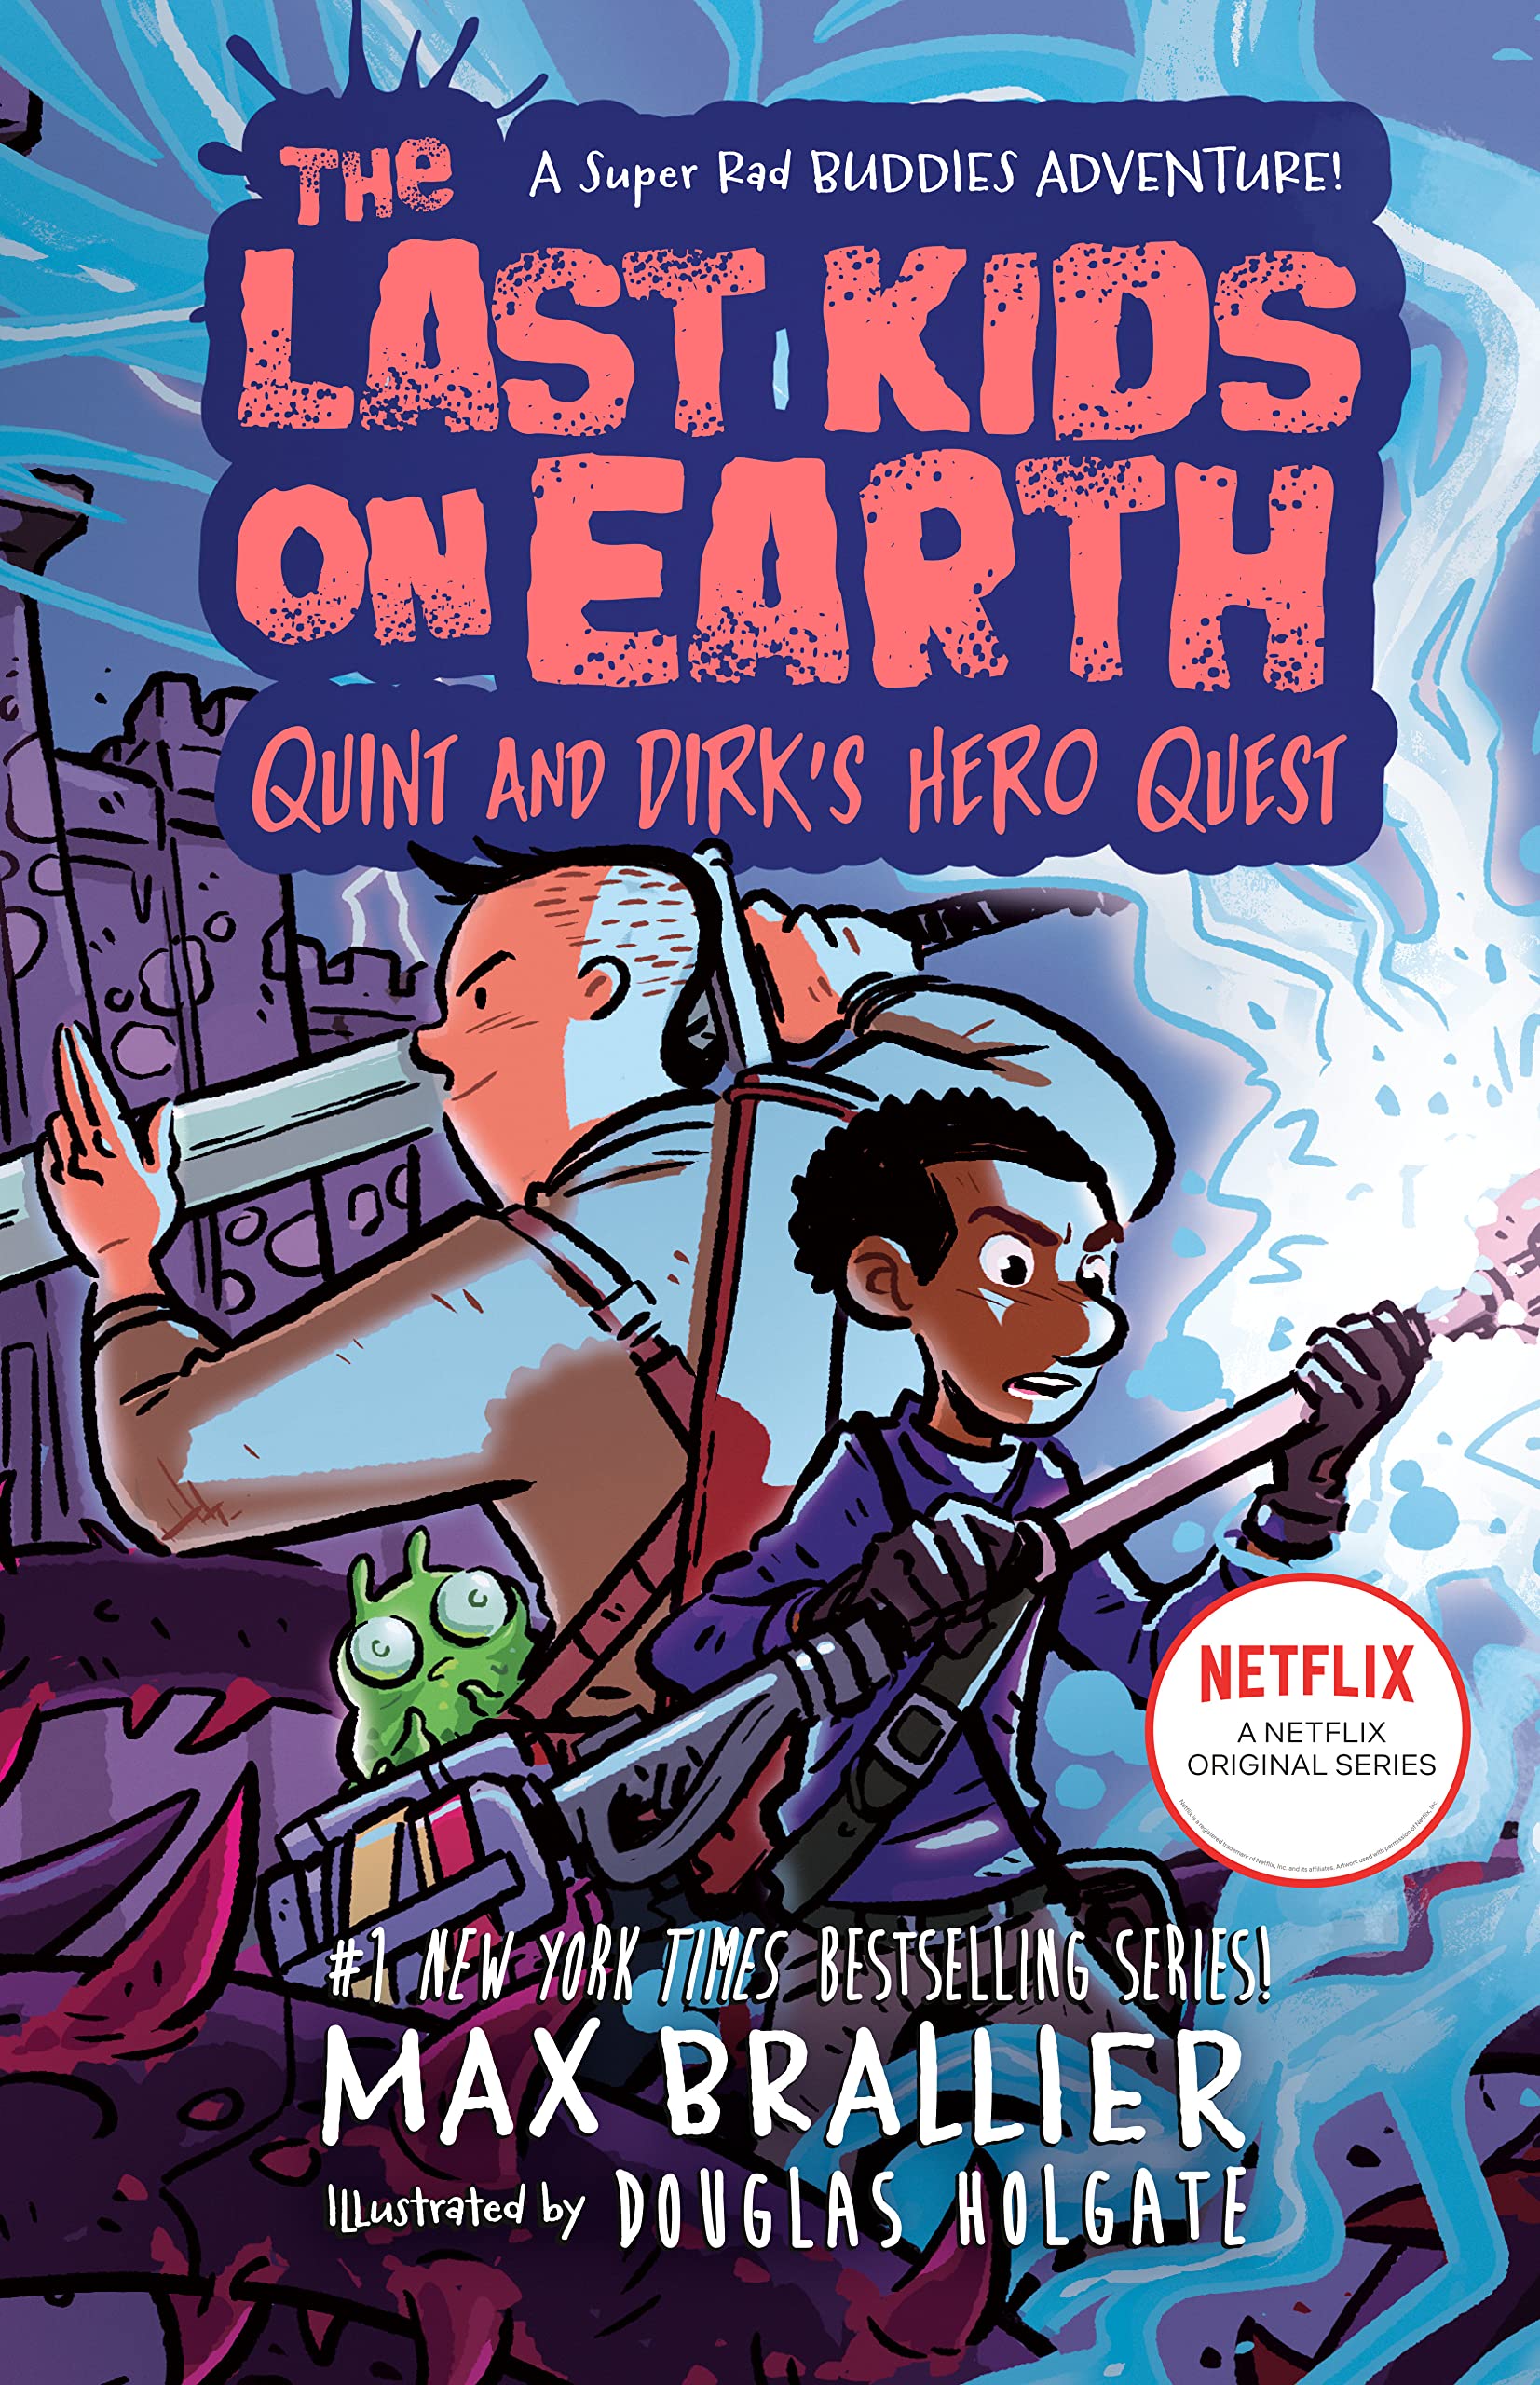 The Last Kids on Earth: Quint and Dirk’s Hero Quest (Last Kids on Earth #7.5) by Max Brallier